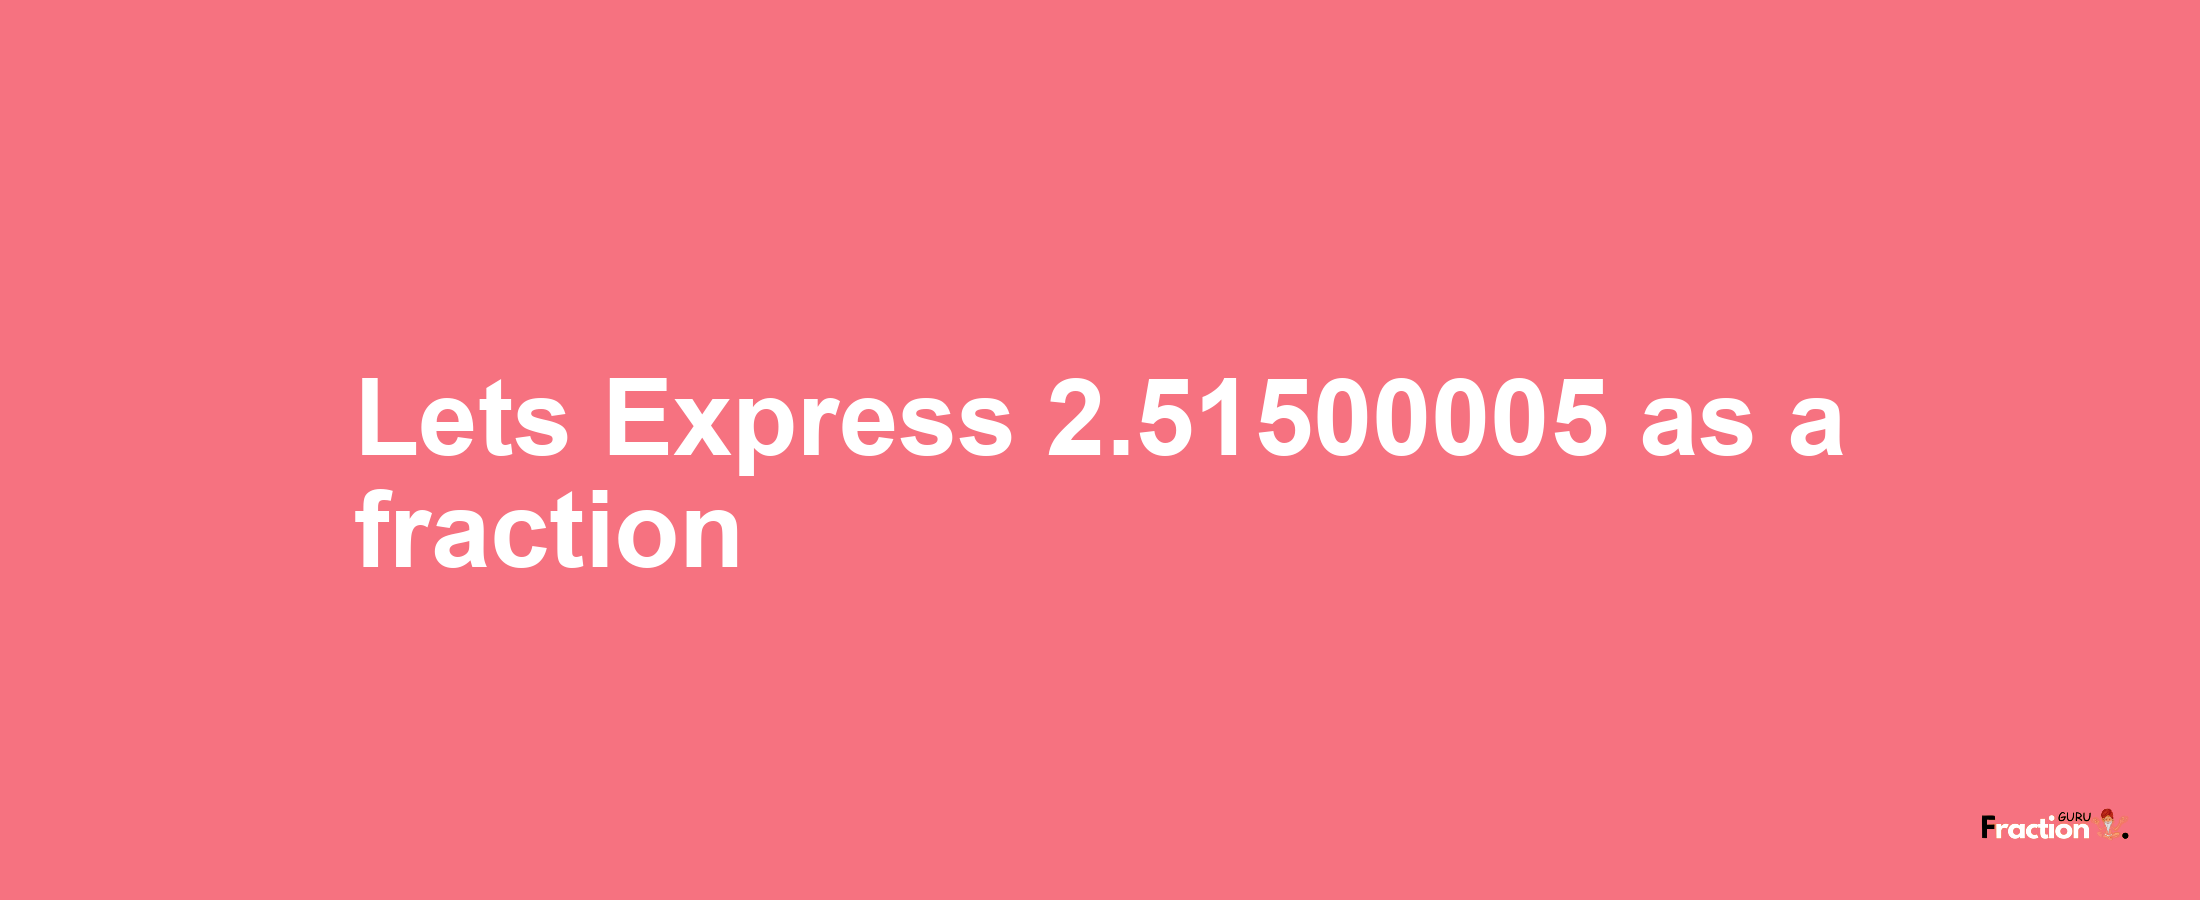 Lets Express 2.51500005 as afraction